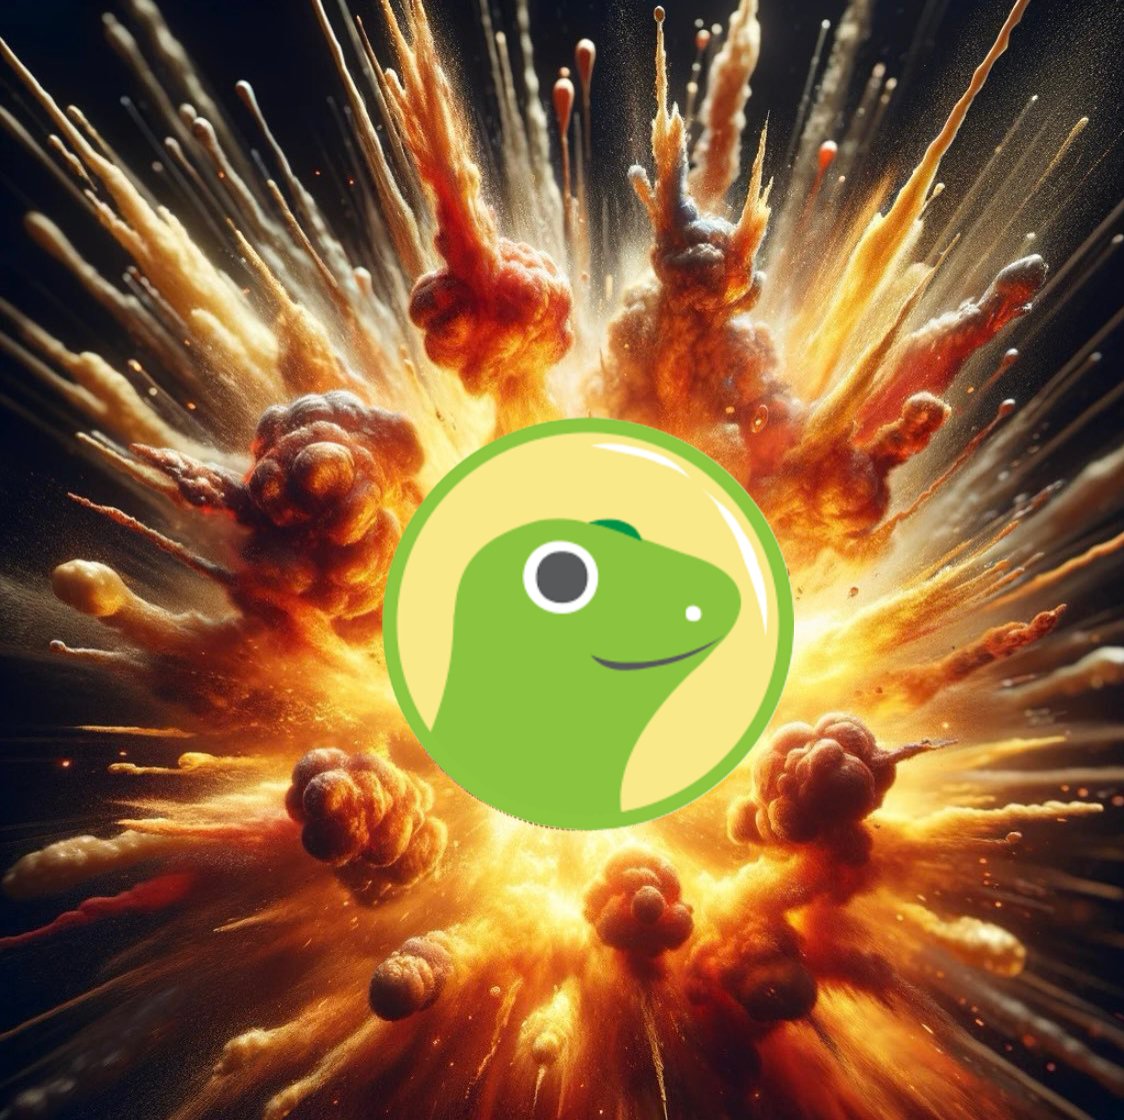 @coingecko #DRC20 with coingecko 
Tic tac tic tac ...
@Kabosu_DRC20 
#DOSU for the win 
#DOGE #tothemoon